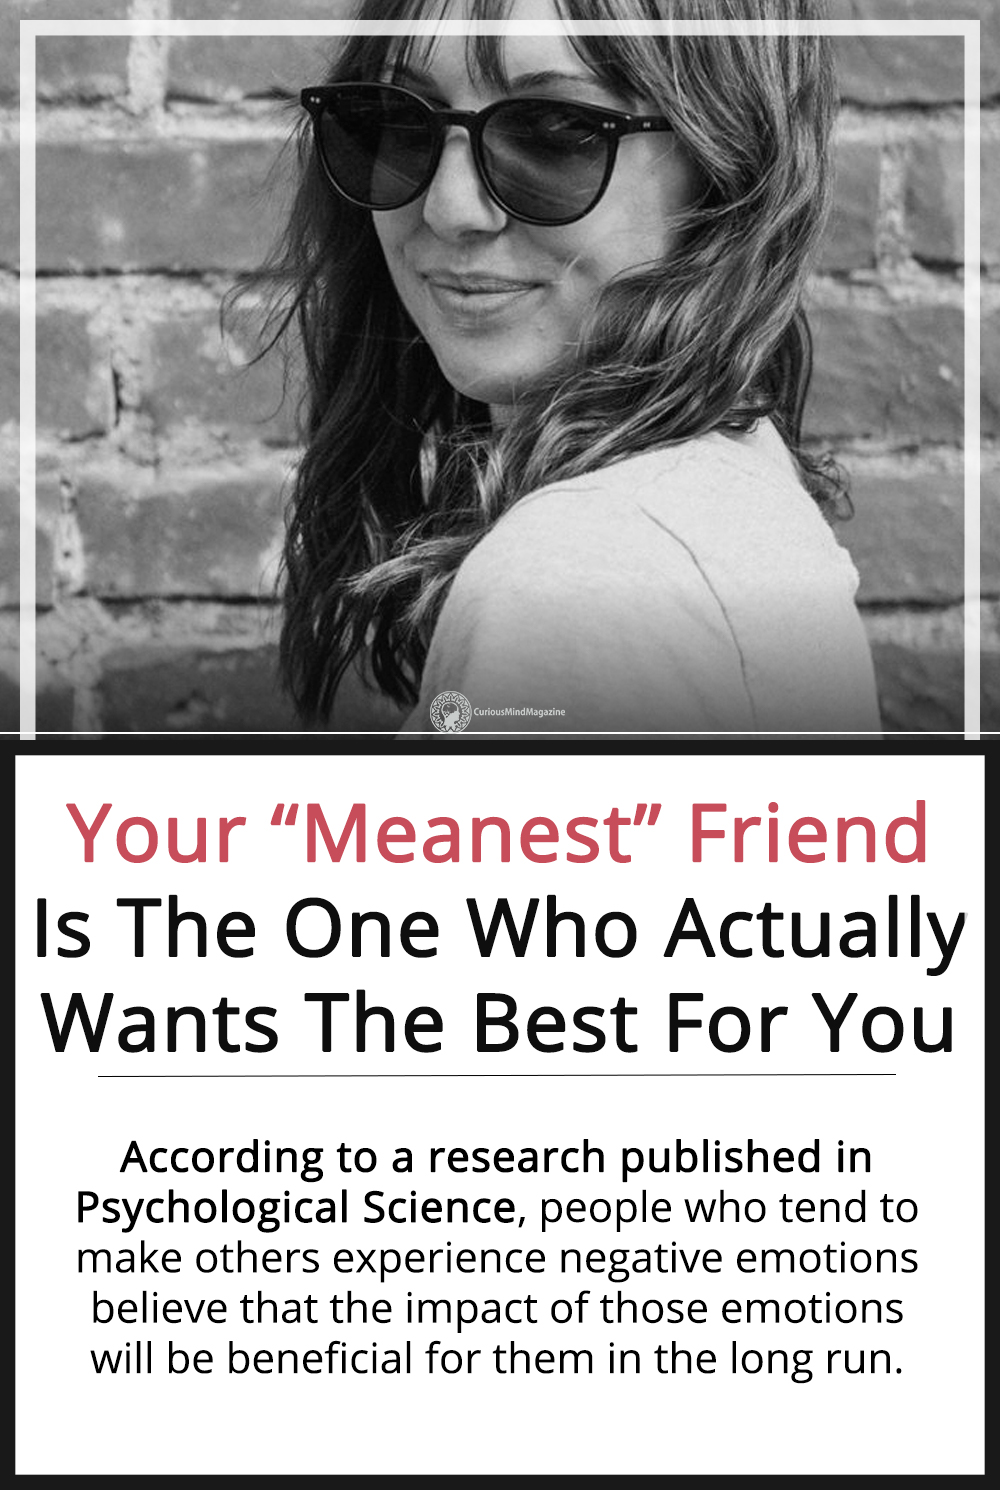 Your “Meanest” Friend Is The One Who Actually Wants The Best For You And Gives You The Best Advice